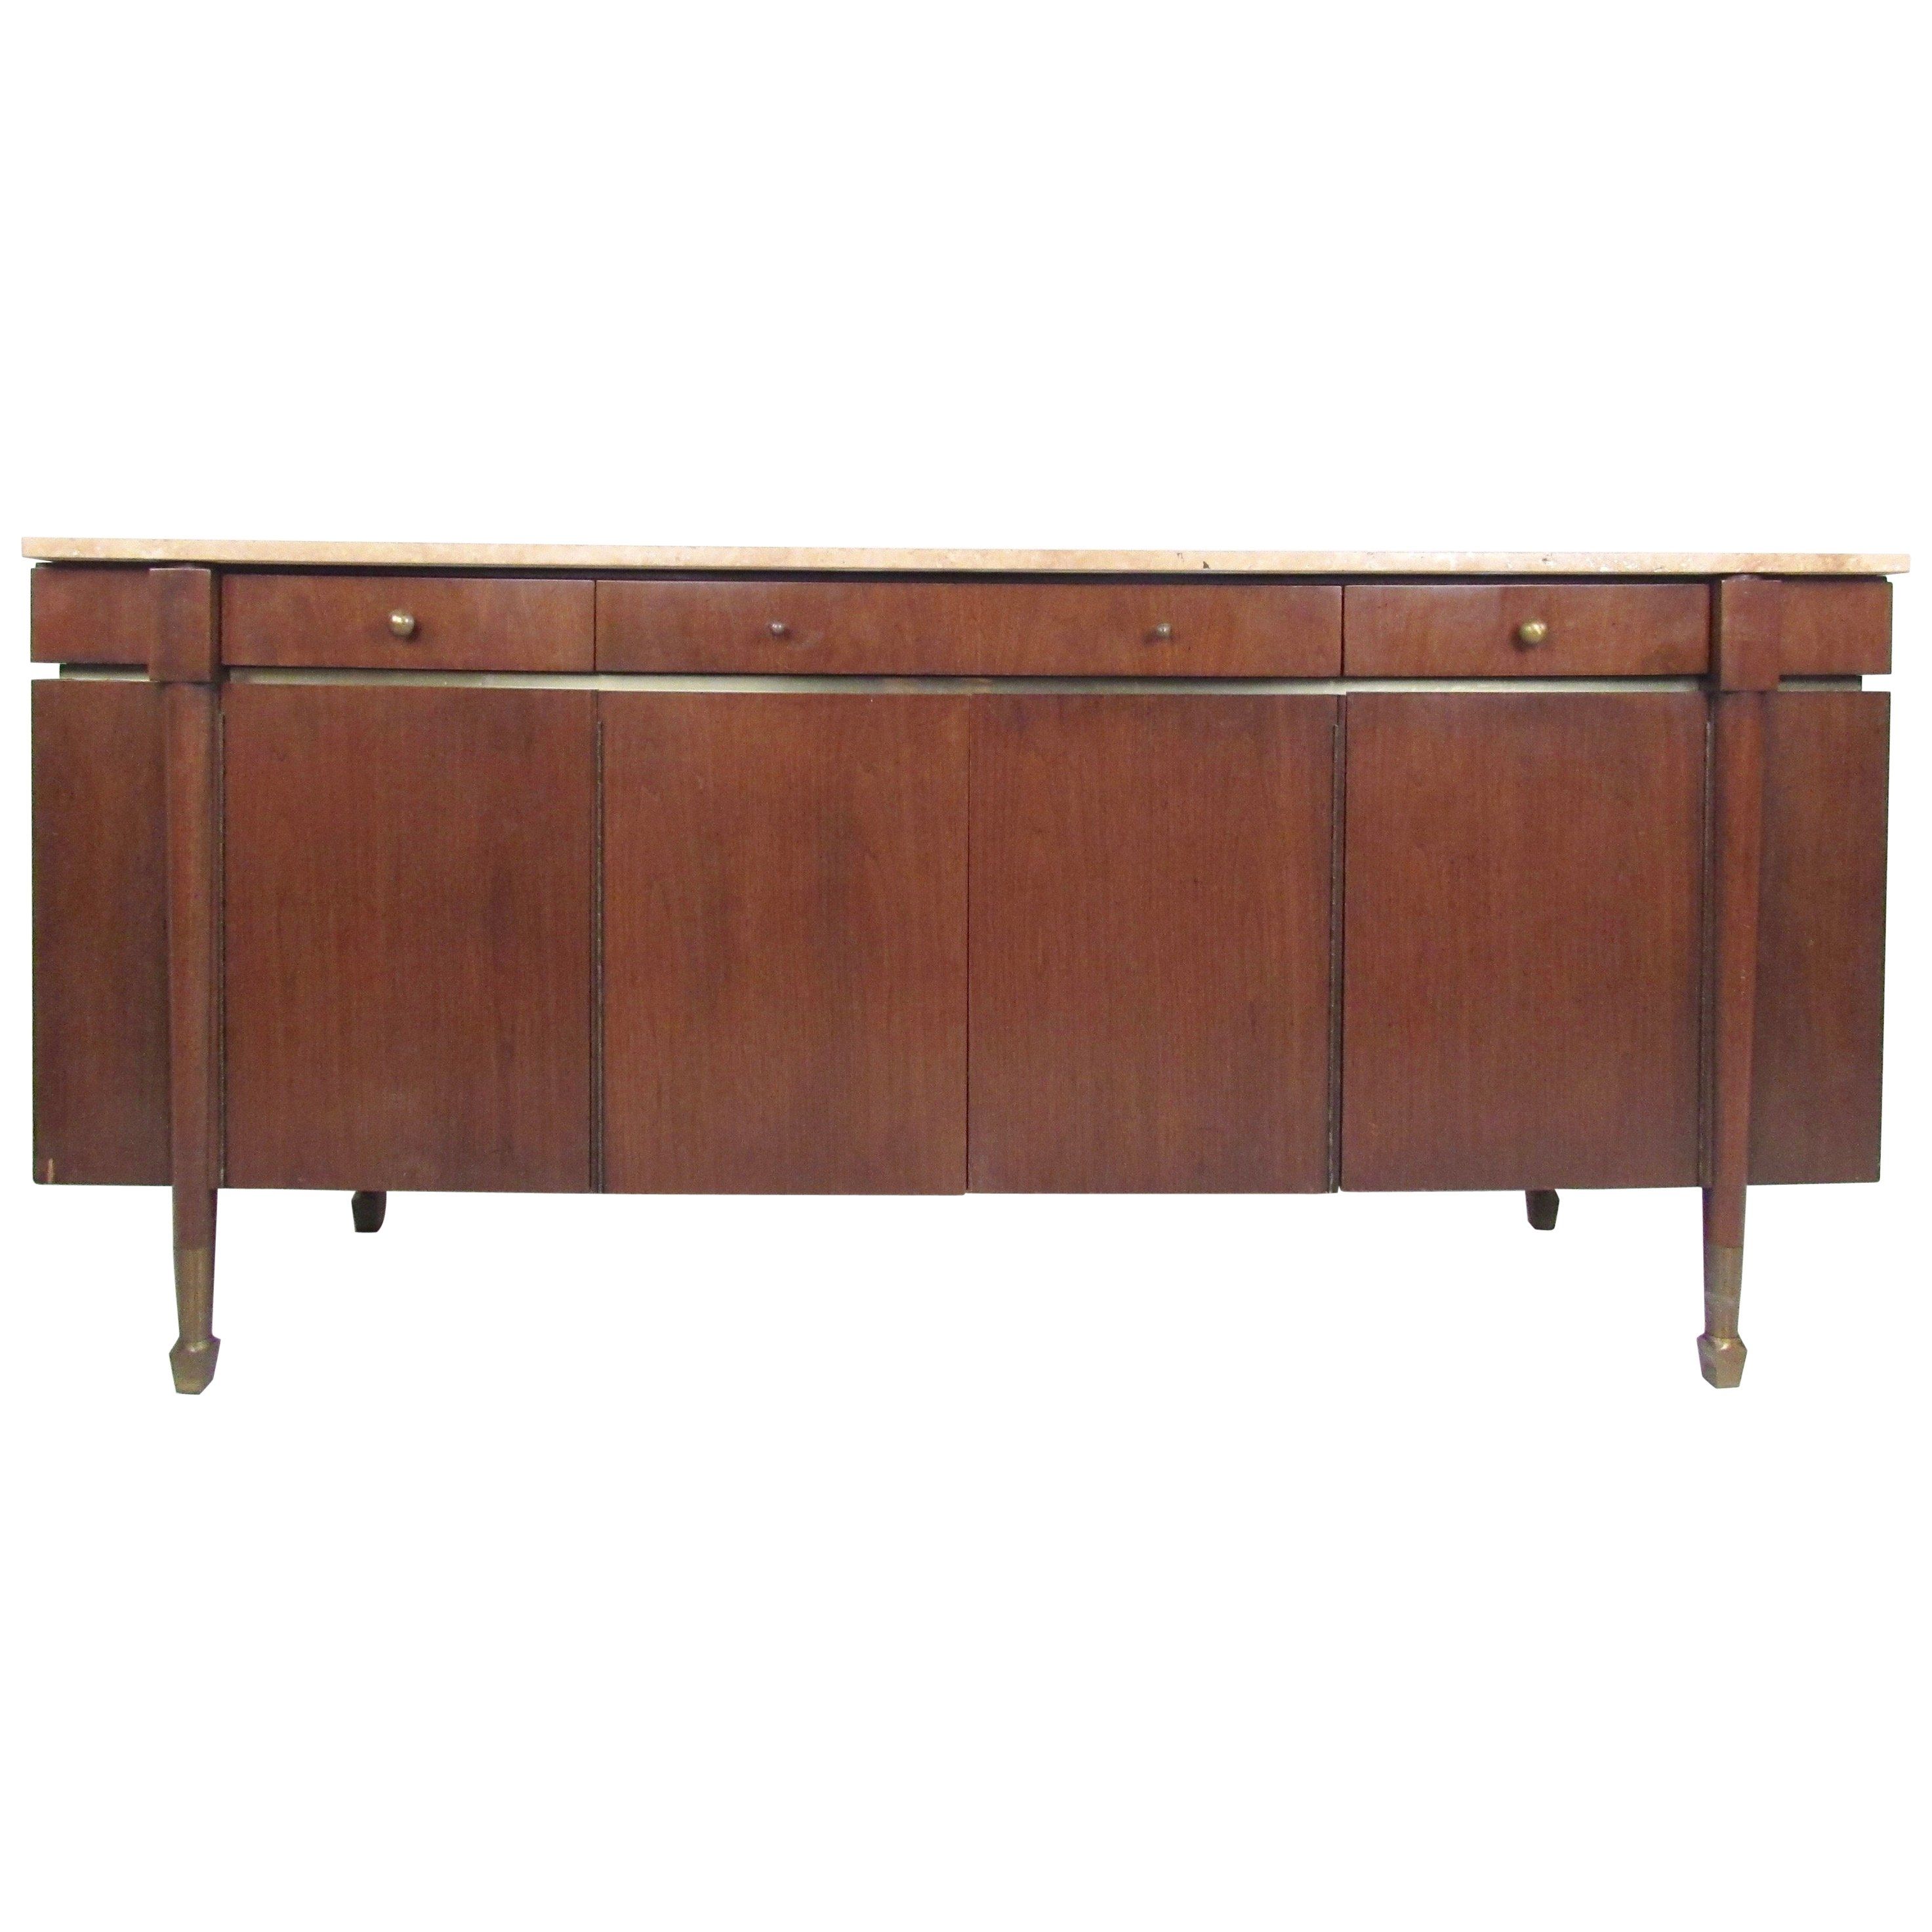 Striking 'intarsia' Sideboard With A Vintage Designaldo Rossi With Regard To 2017 Rossi Large Sideboards (View 2 of 20)